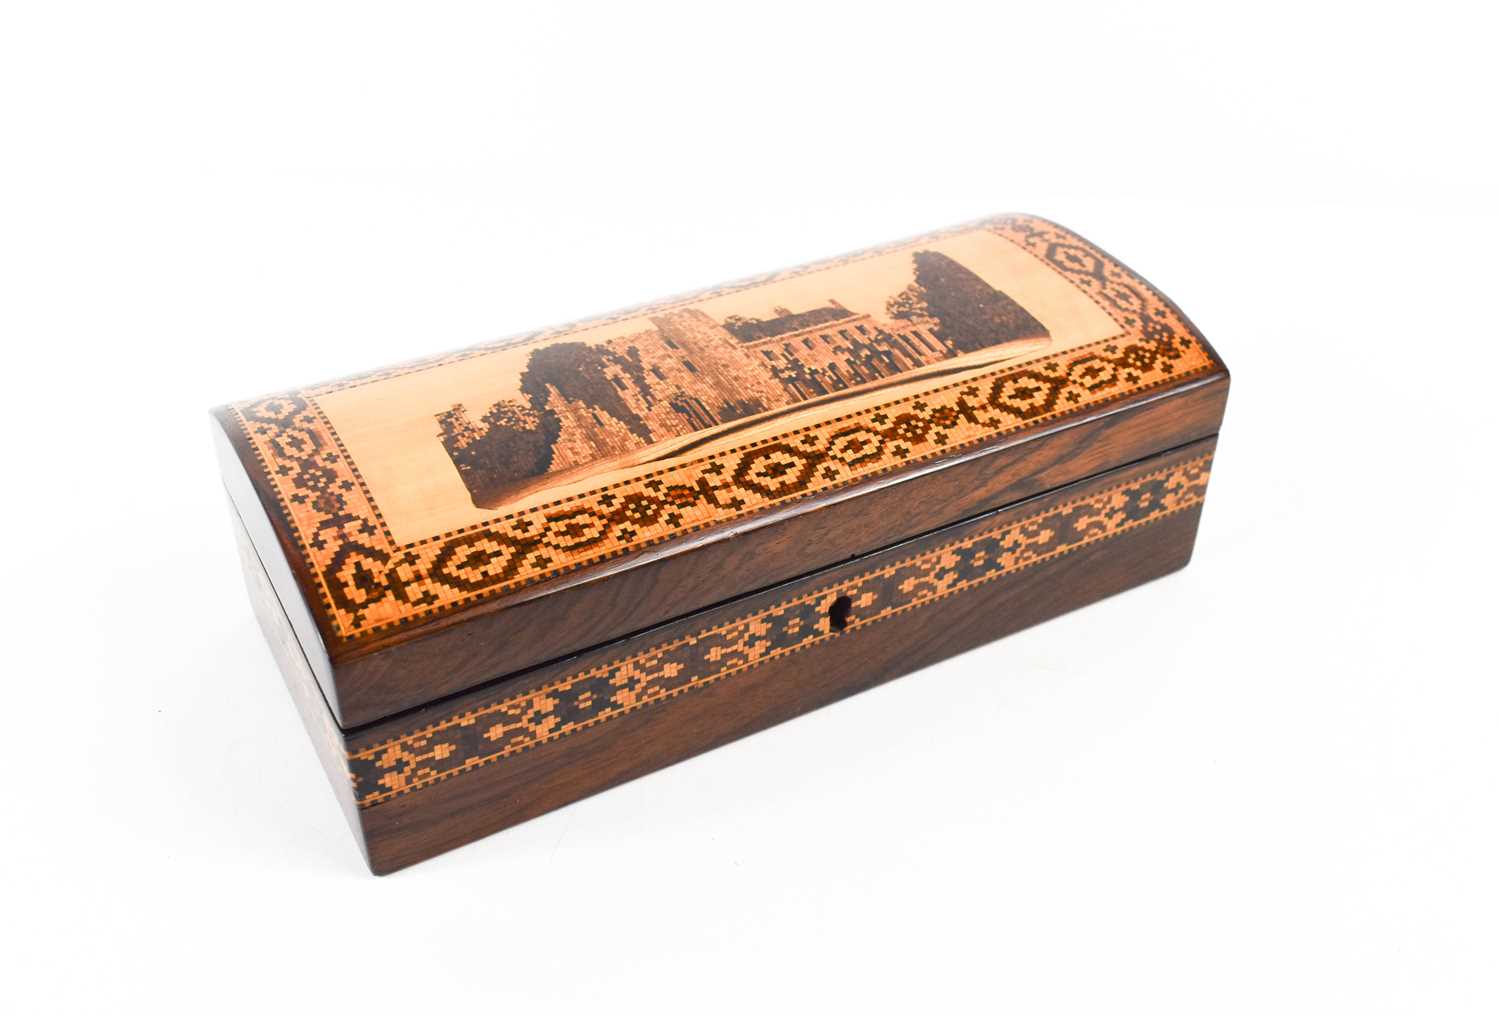 A 19th century Tonbridge ware rosewood glove box, the domed lid depicting a view of Tonbridge - Image 3 of 4